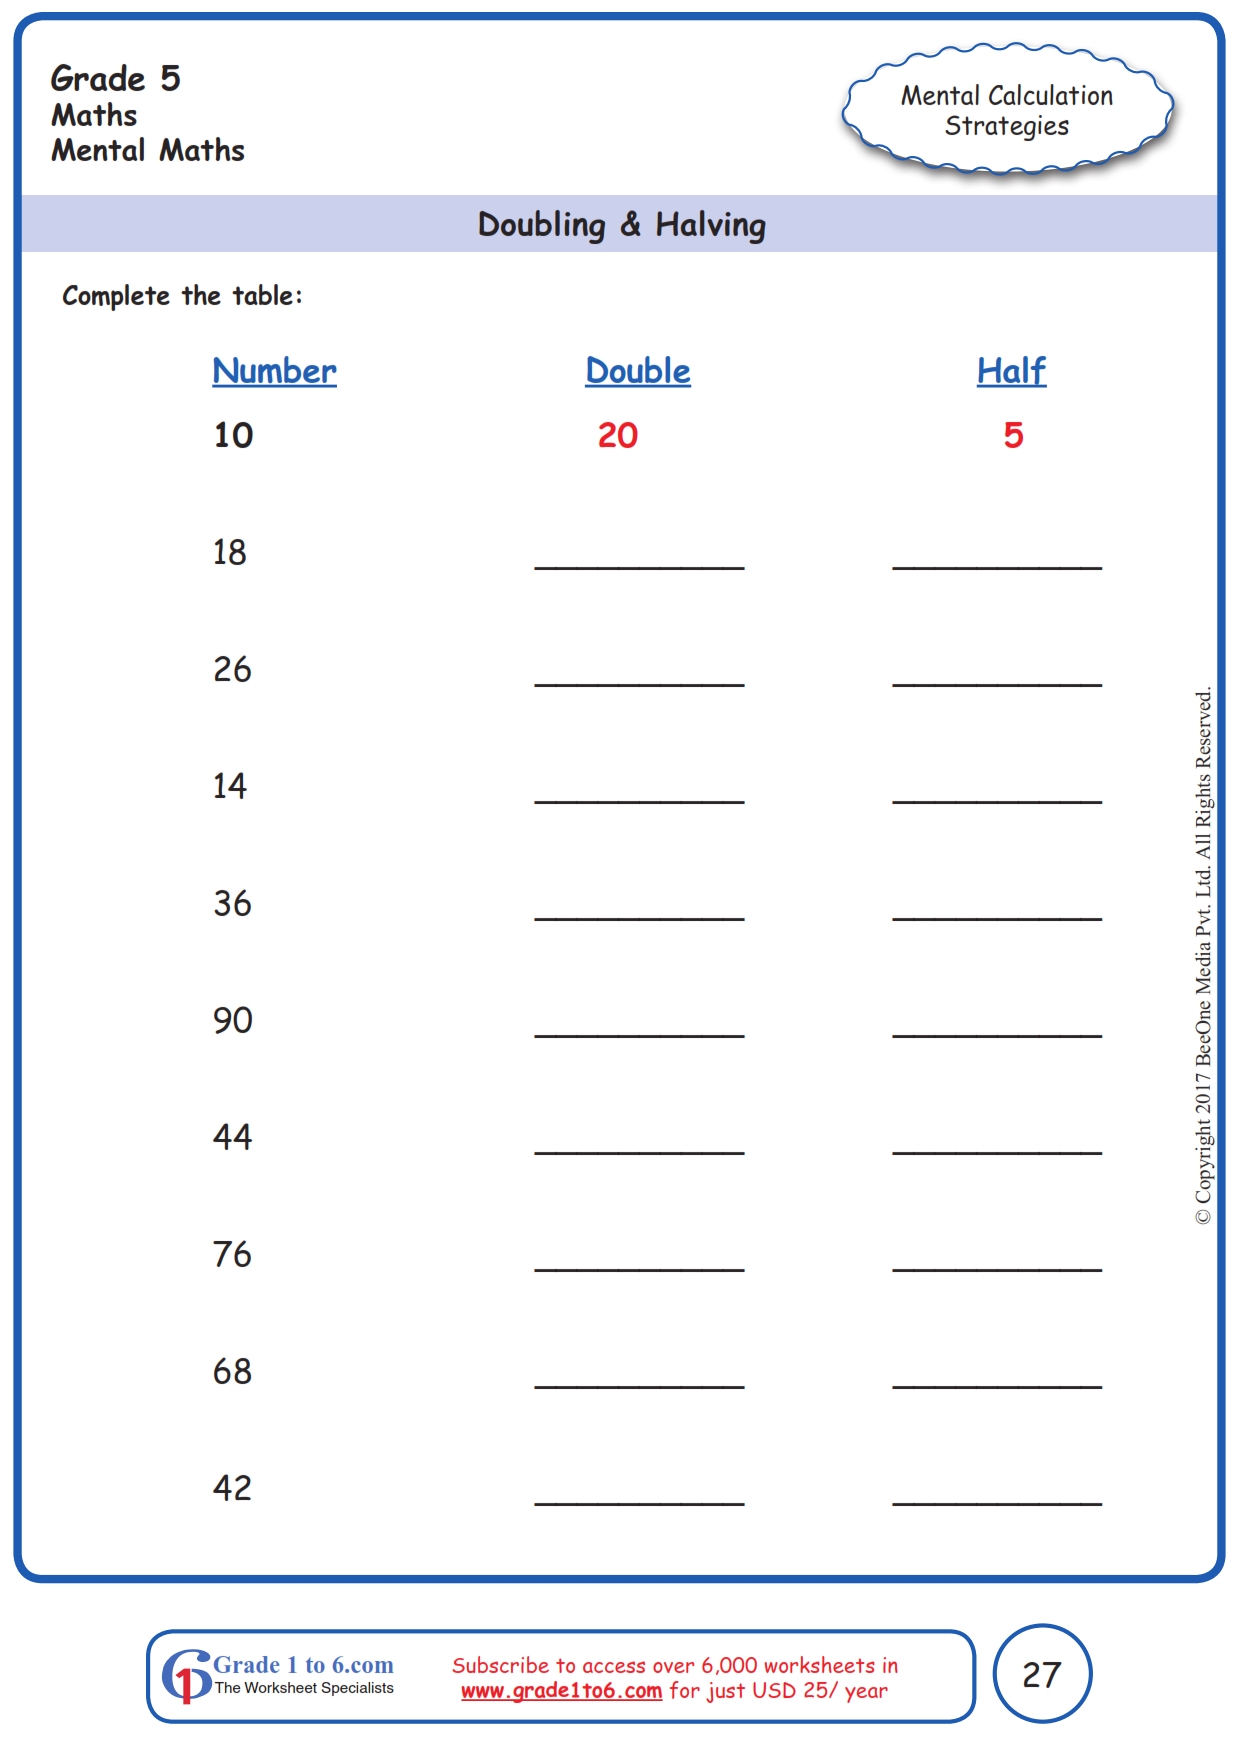 doubling-halving-worksheets-www-grade1to6